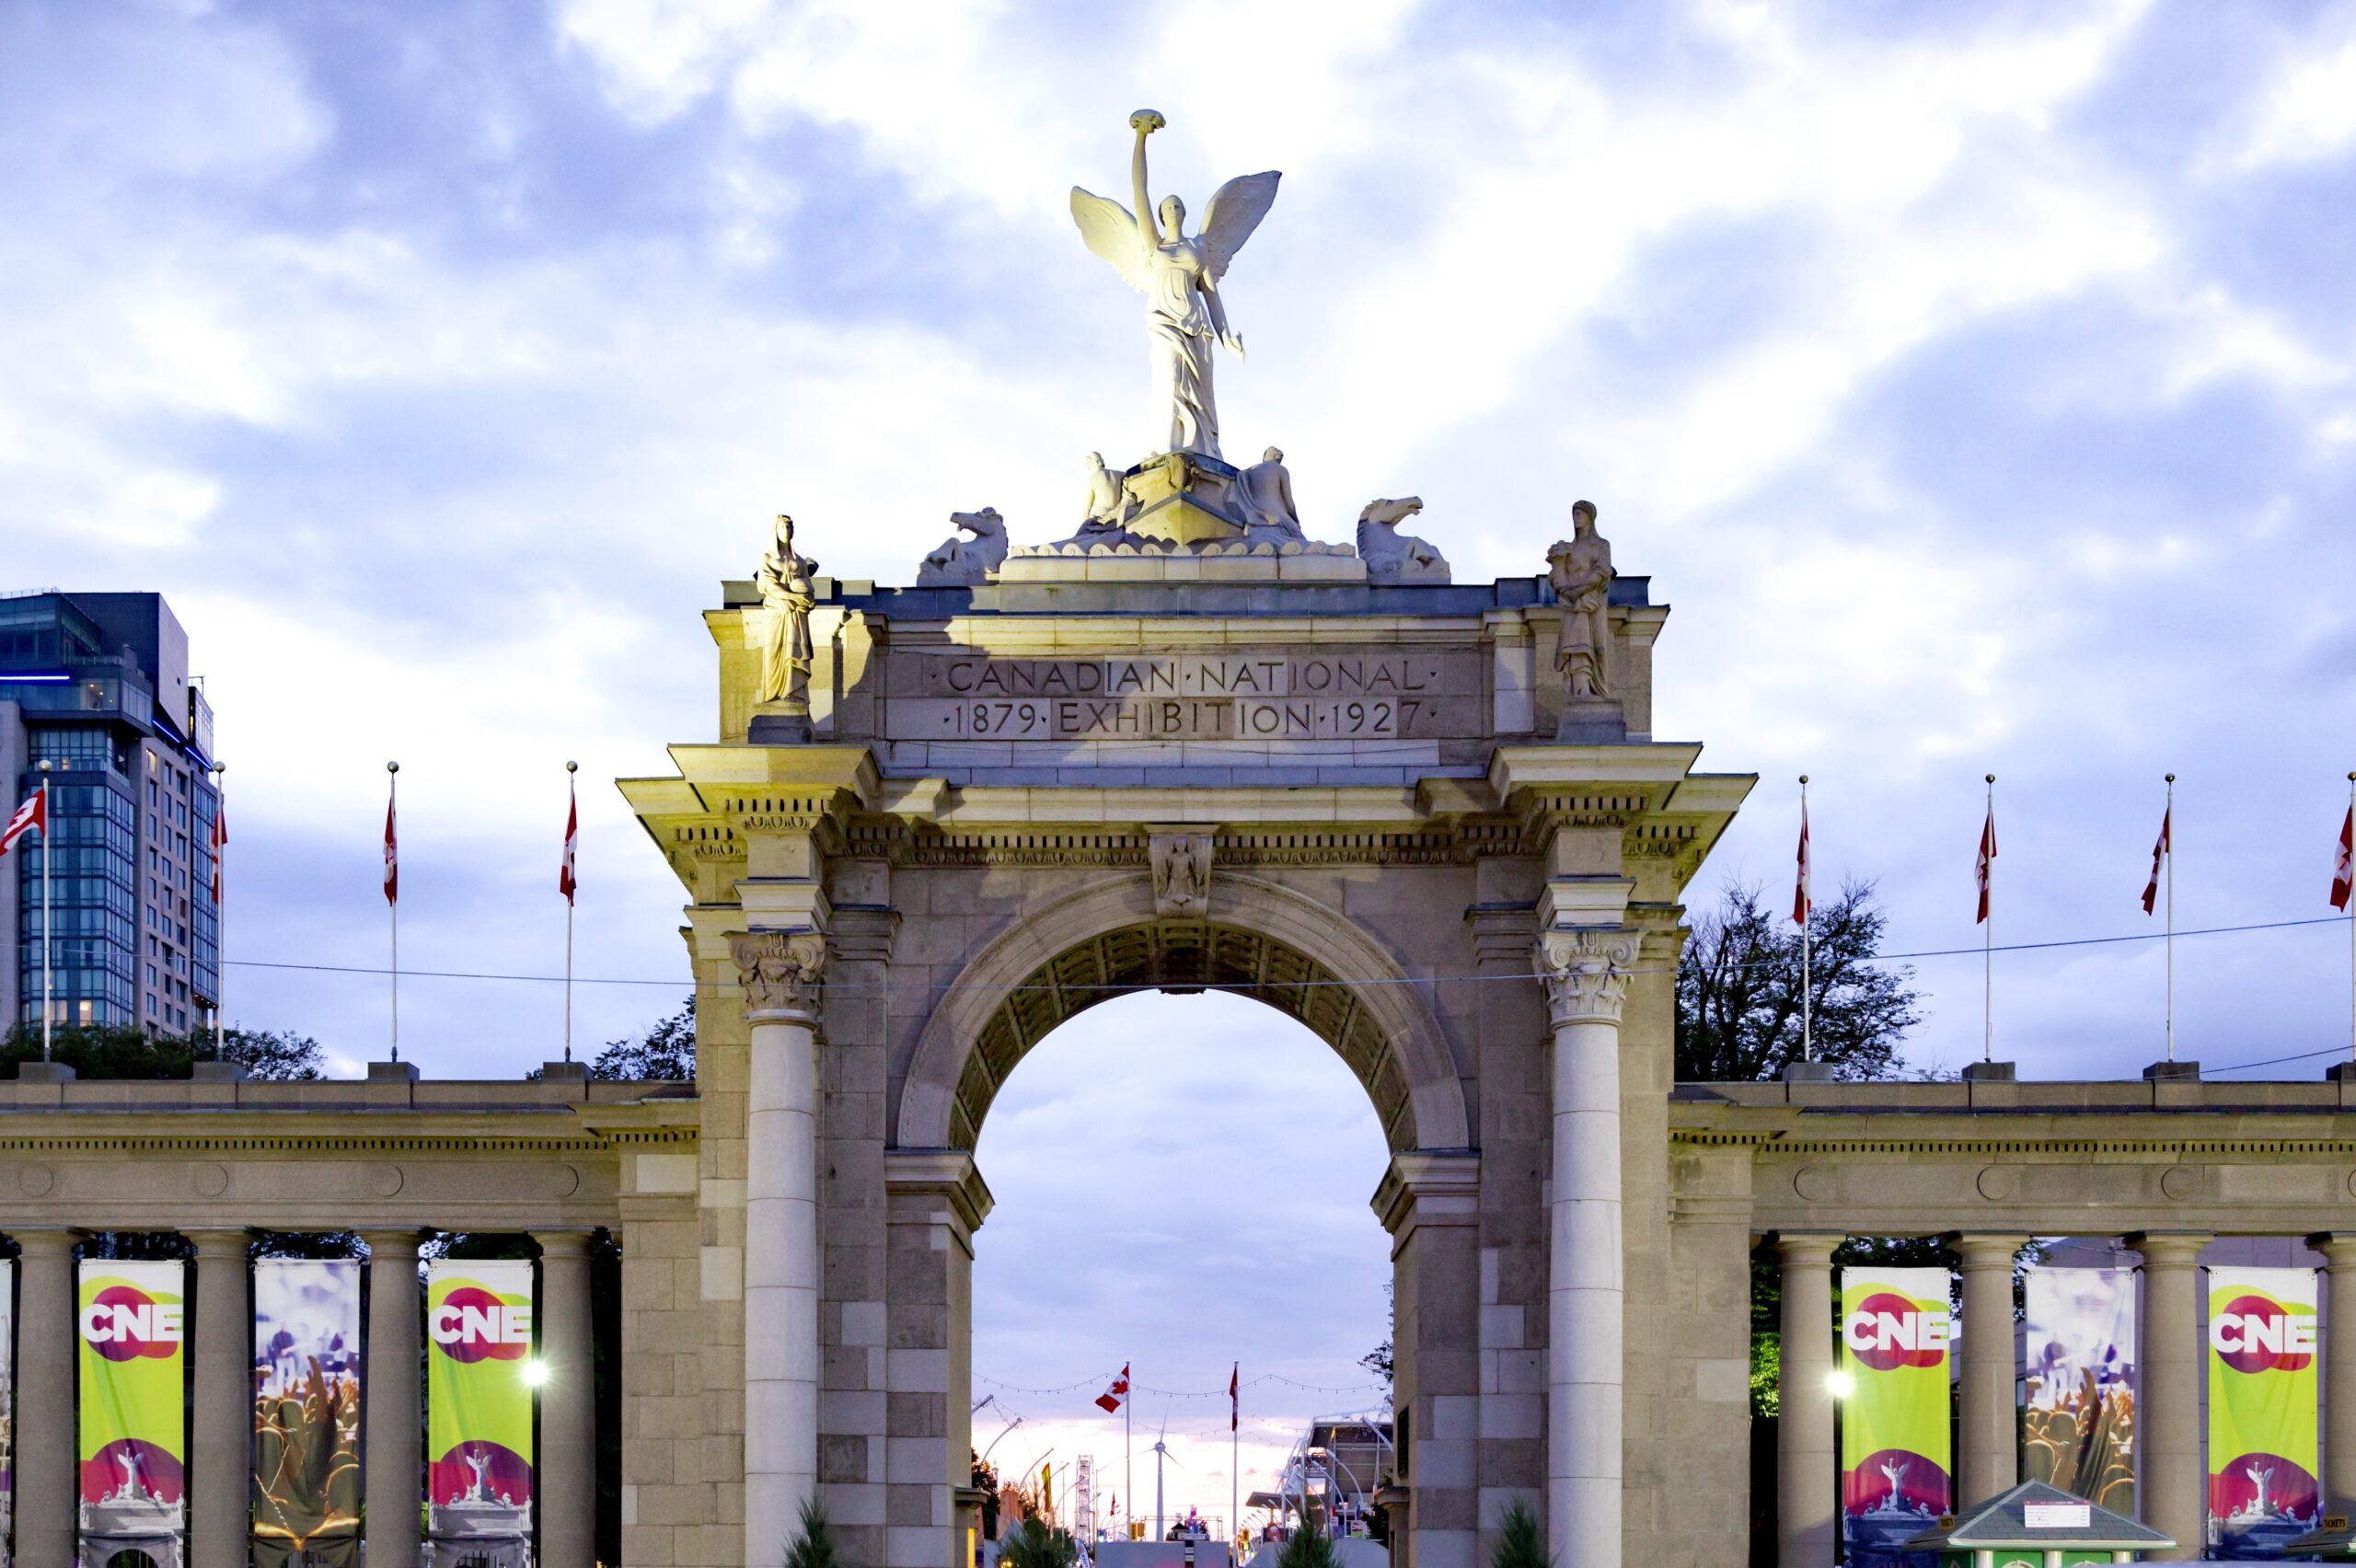 CNE gates in perfect view. Image of the Princes' Gates from the road.